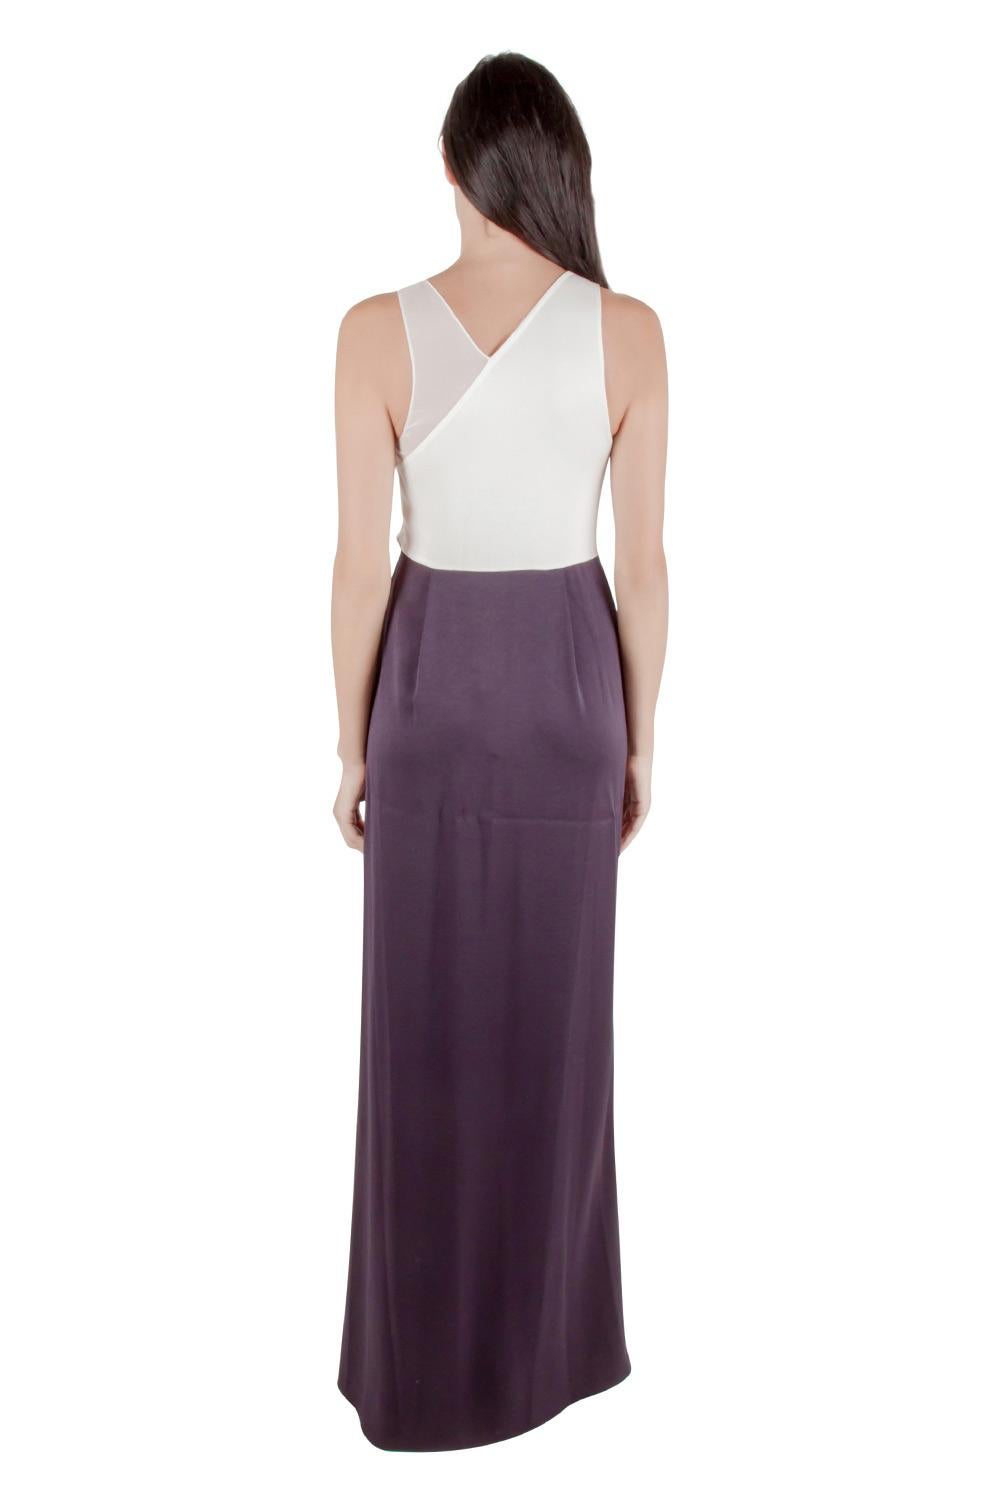 This pretty 3.1 Phillip gown features a draped bodice and a full-length bottom. It is styled in a sleeveless silhouette with an asymmetric neckline. Complete with two well-contrasting hues, you can team this evening gown with elegant heels and